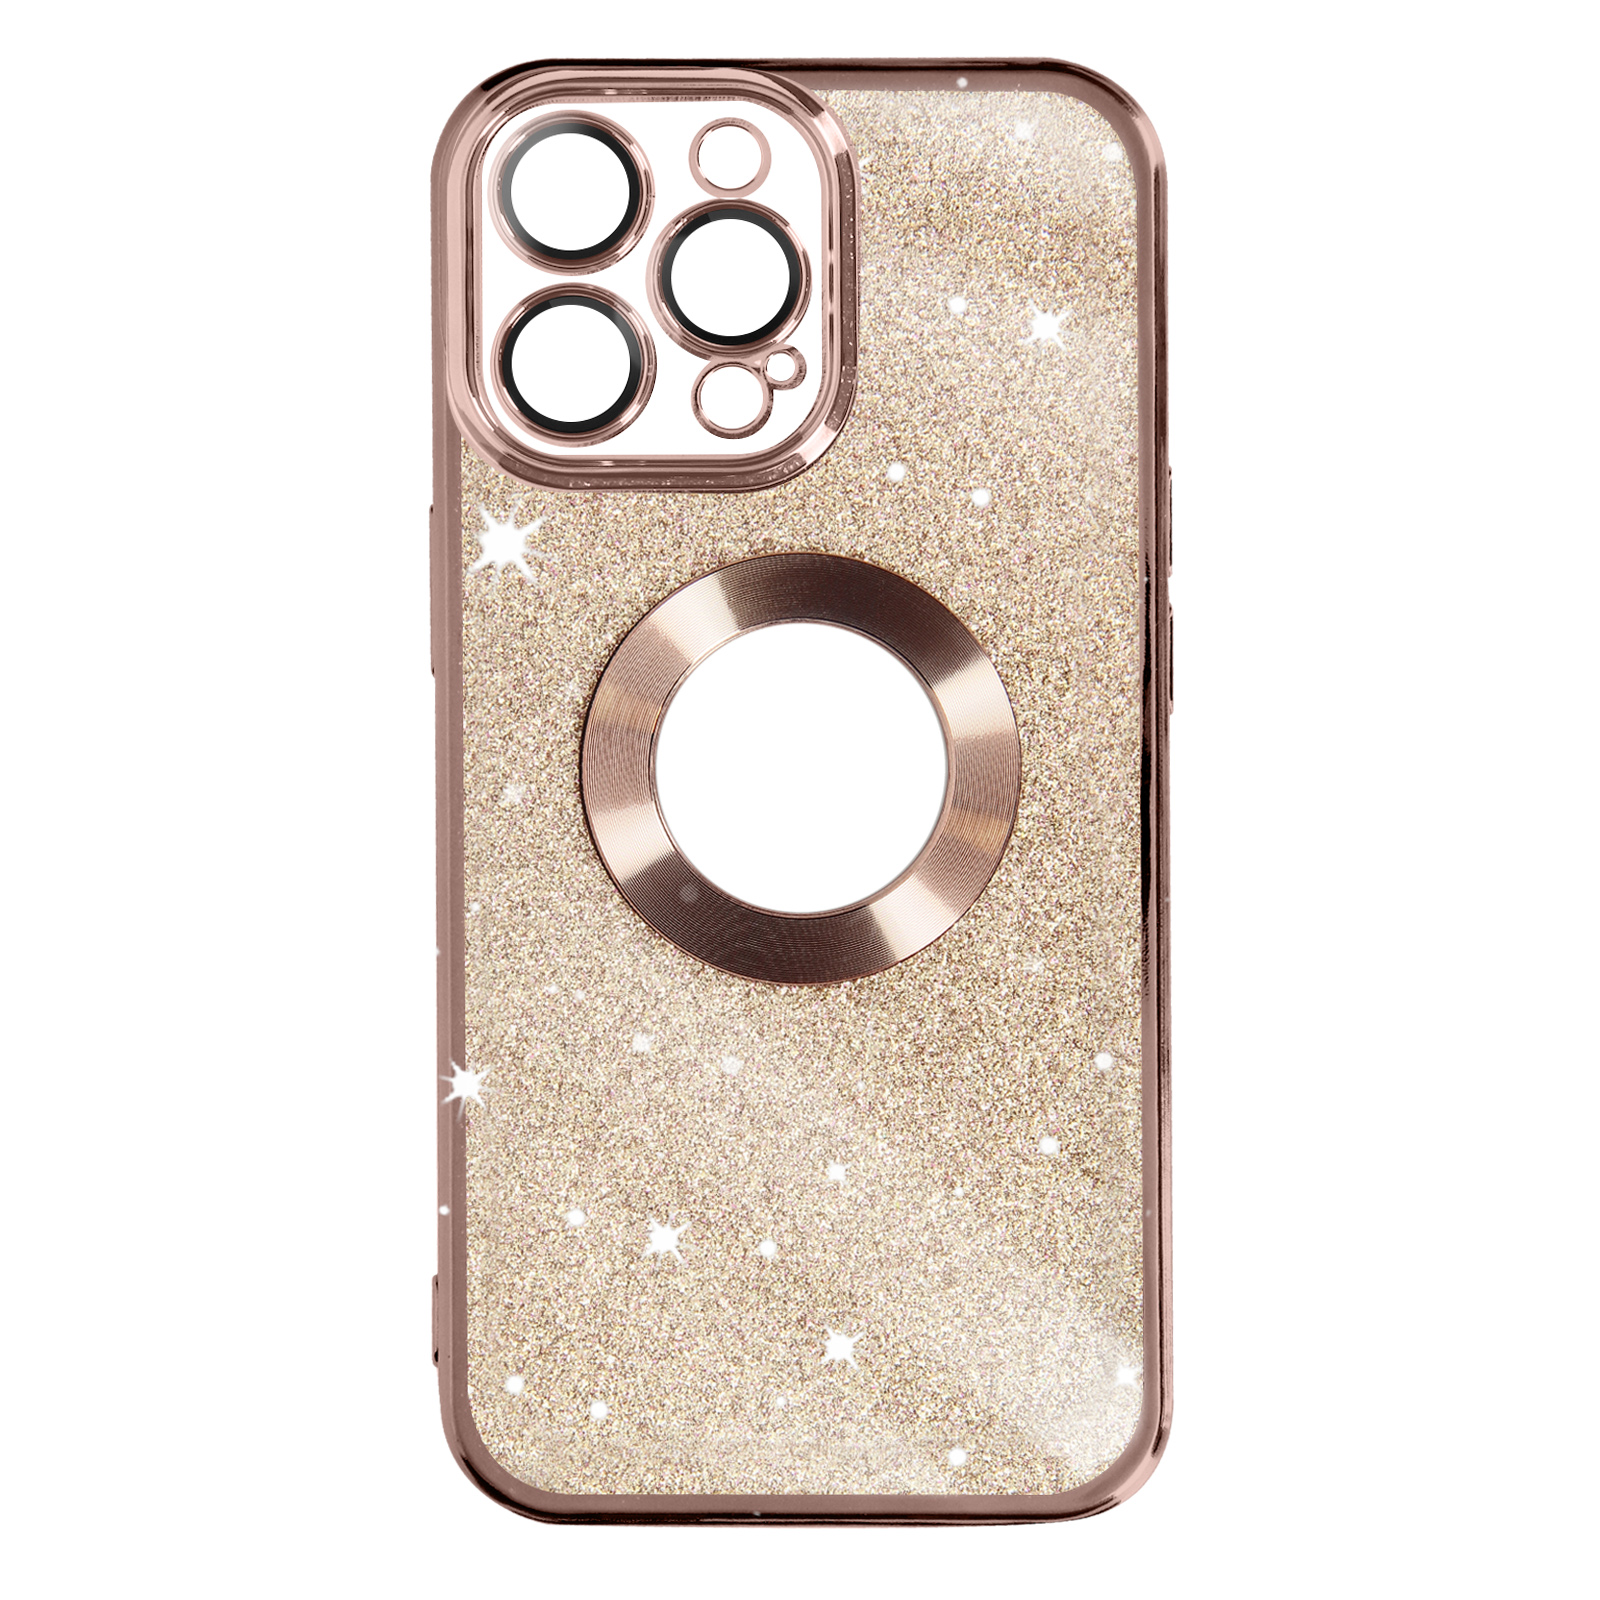 Spark Pro Rosegold Max, Series, Backcover, AVIZAR Protecam Apple, iPhone 14